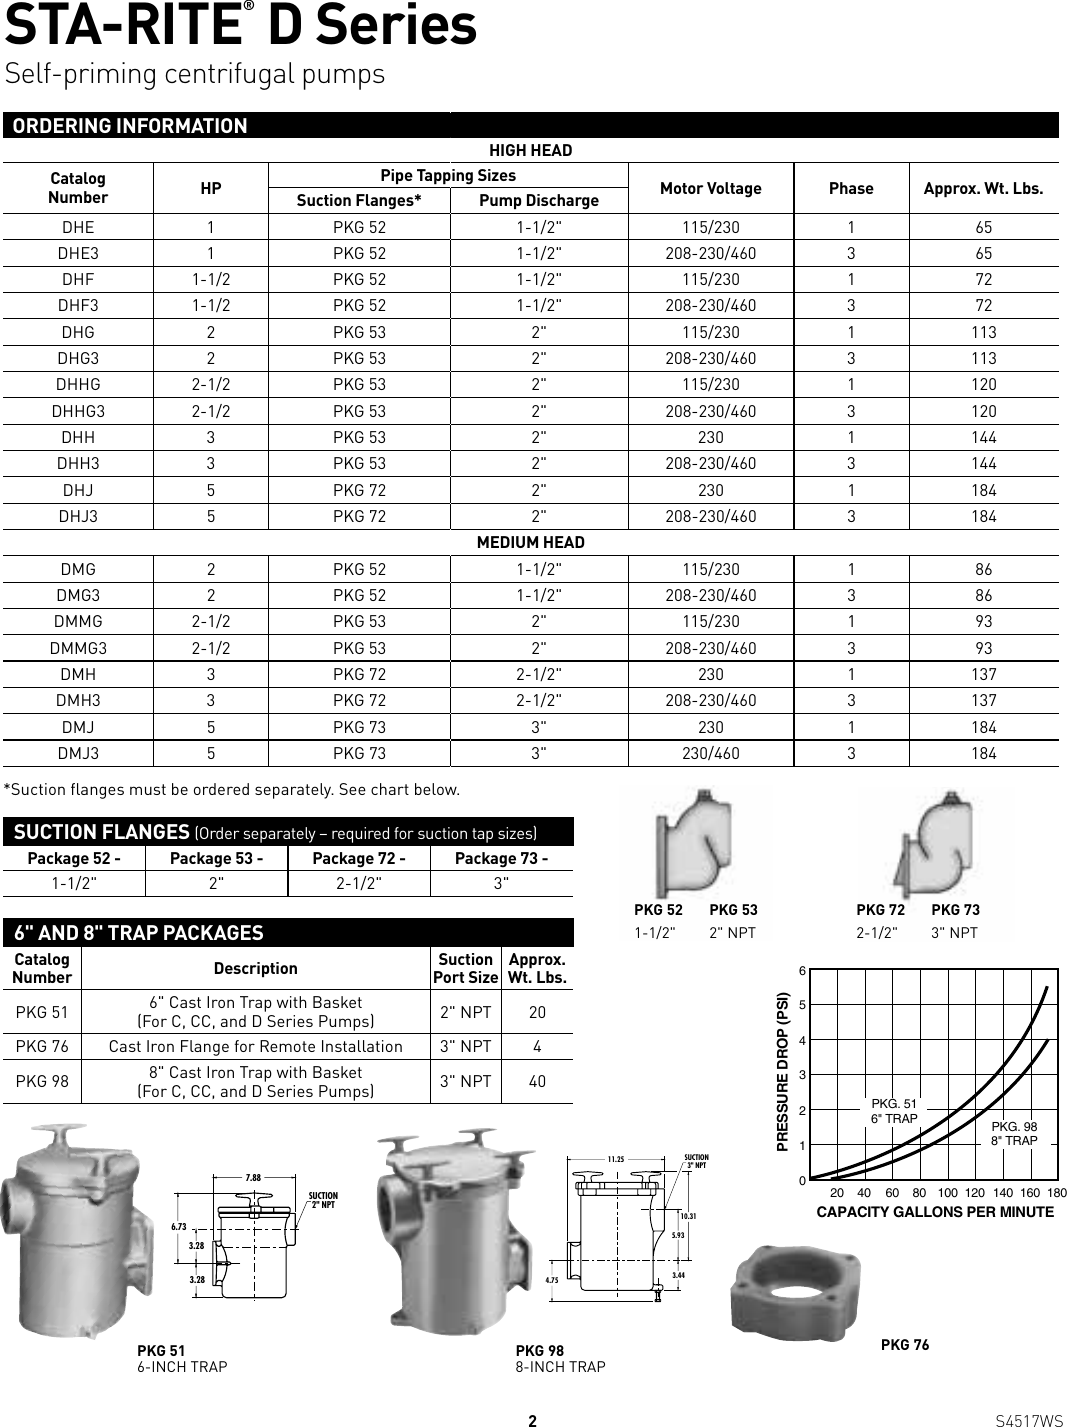 Page 2 of 4 - 539631 1 Sta-Rite D Series Centrifugal Pump Brochure